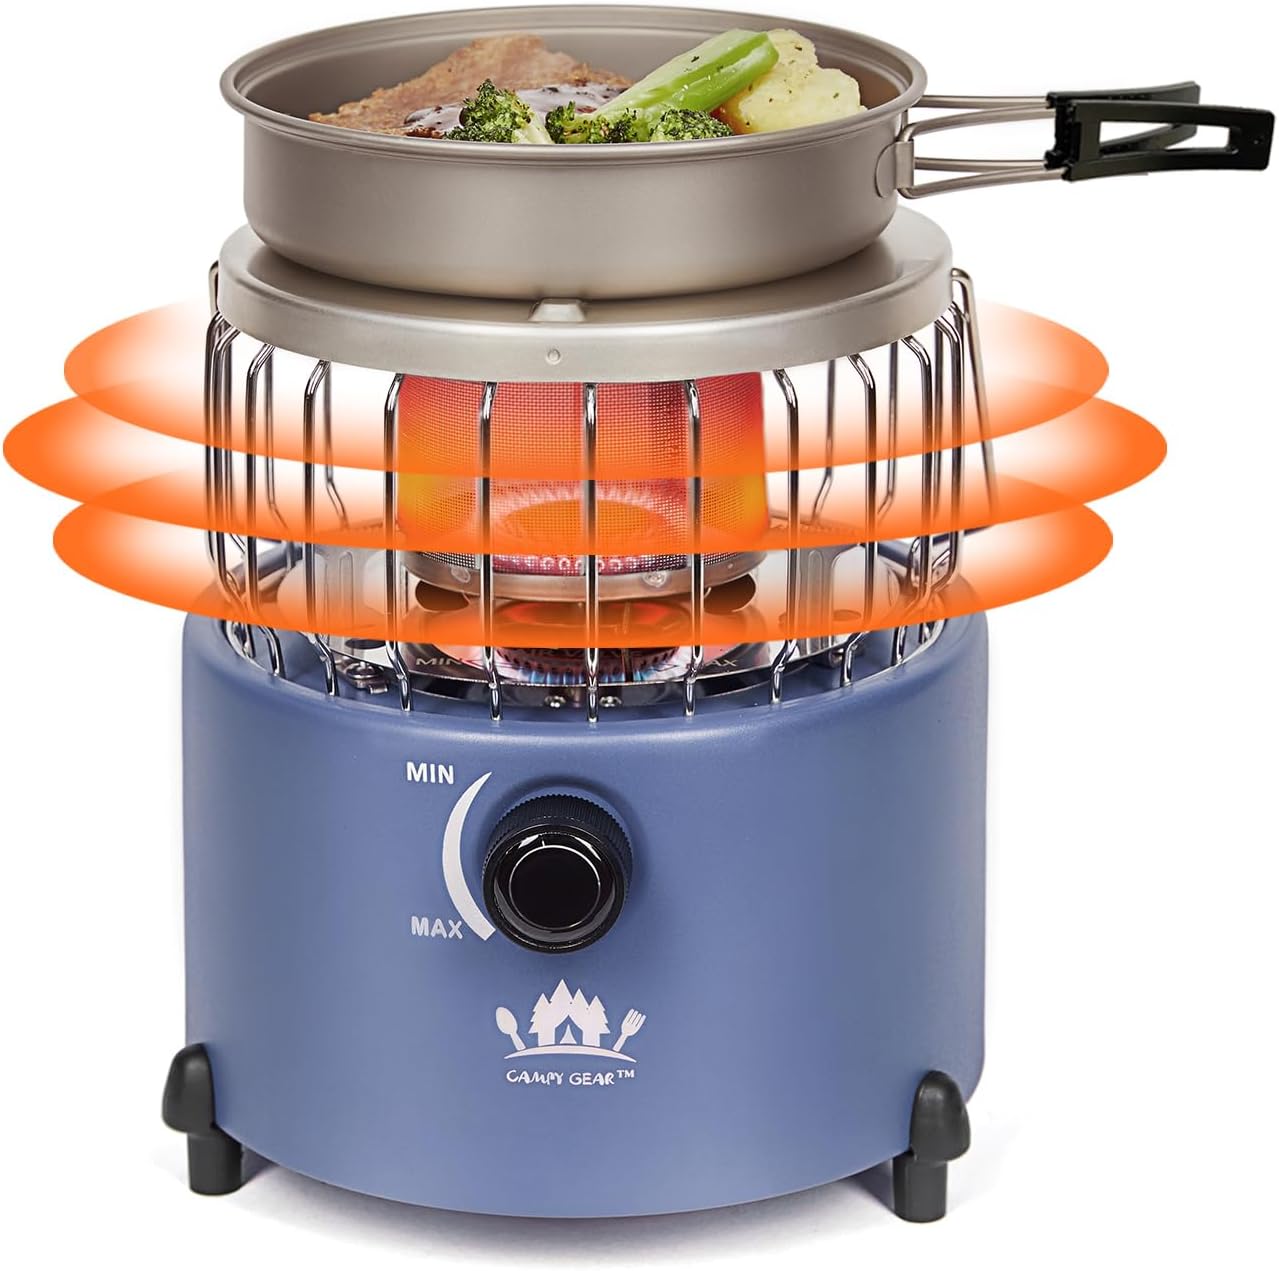 Campy Gear Chubby 2 in 1 Portable Propane Heater & Stove Review